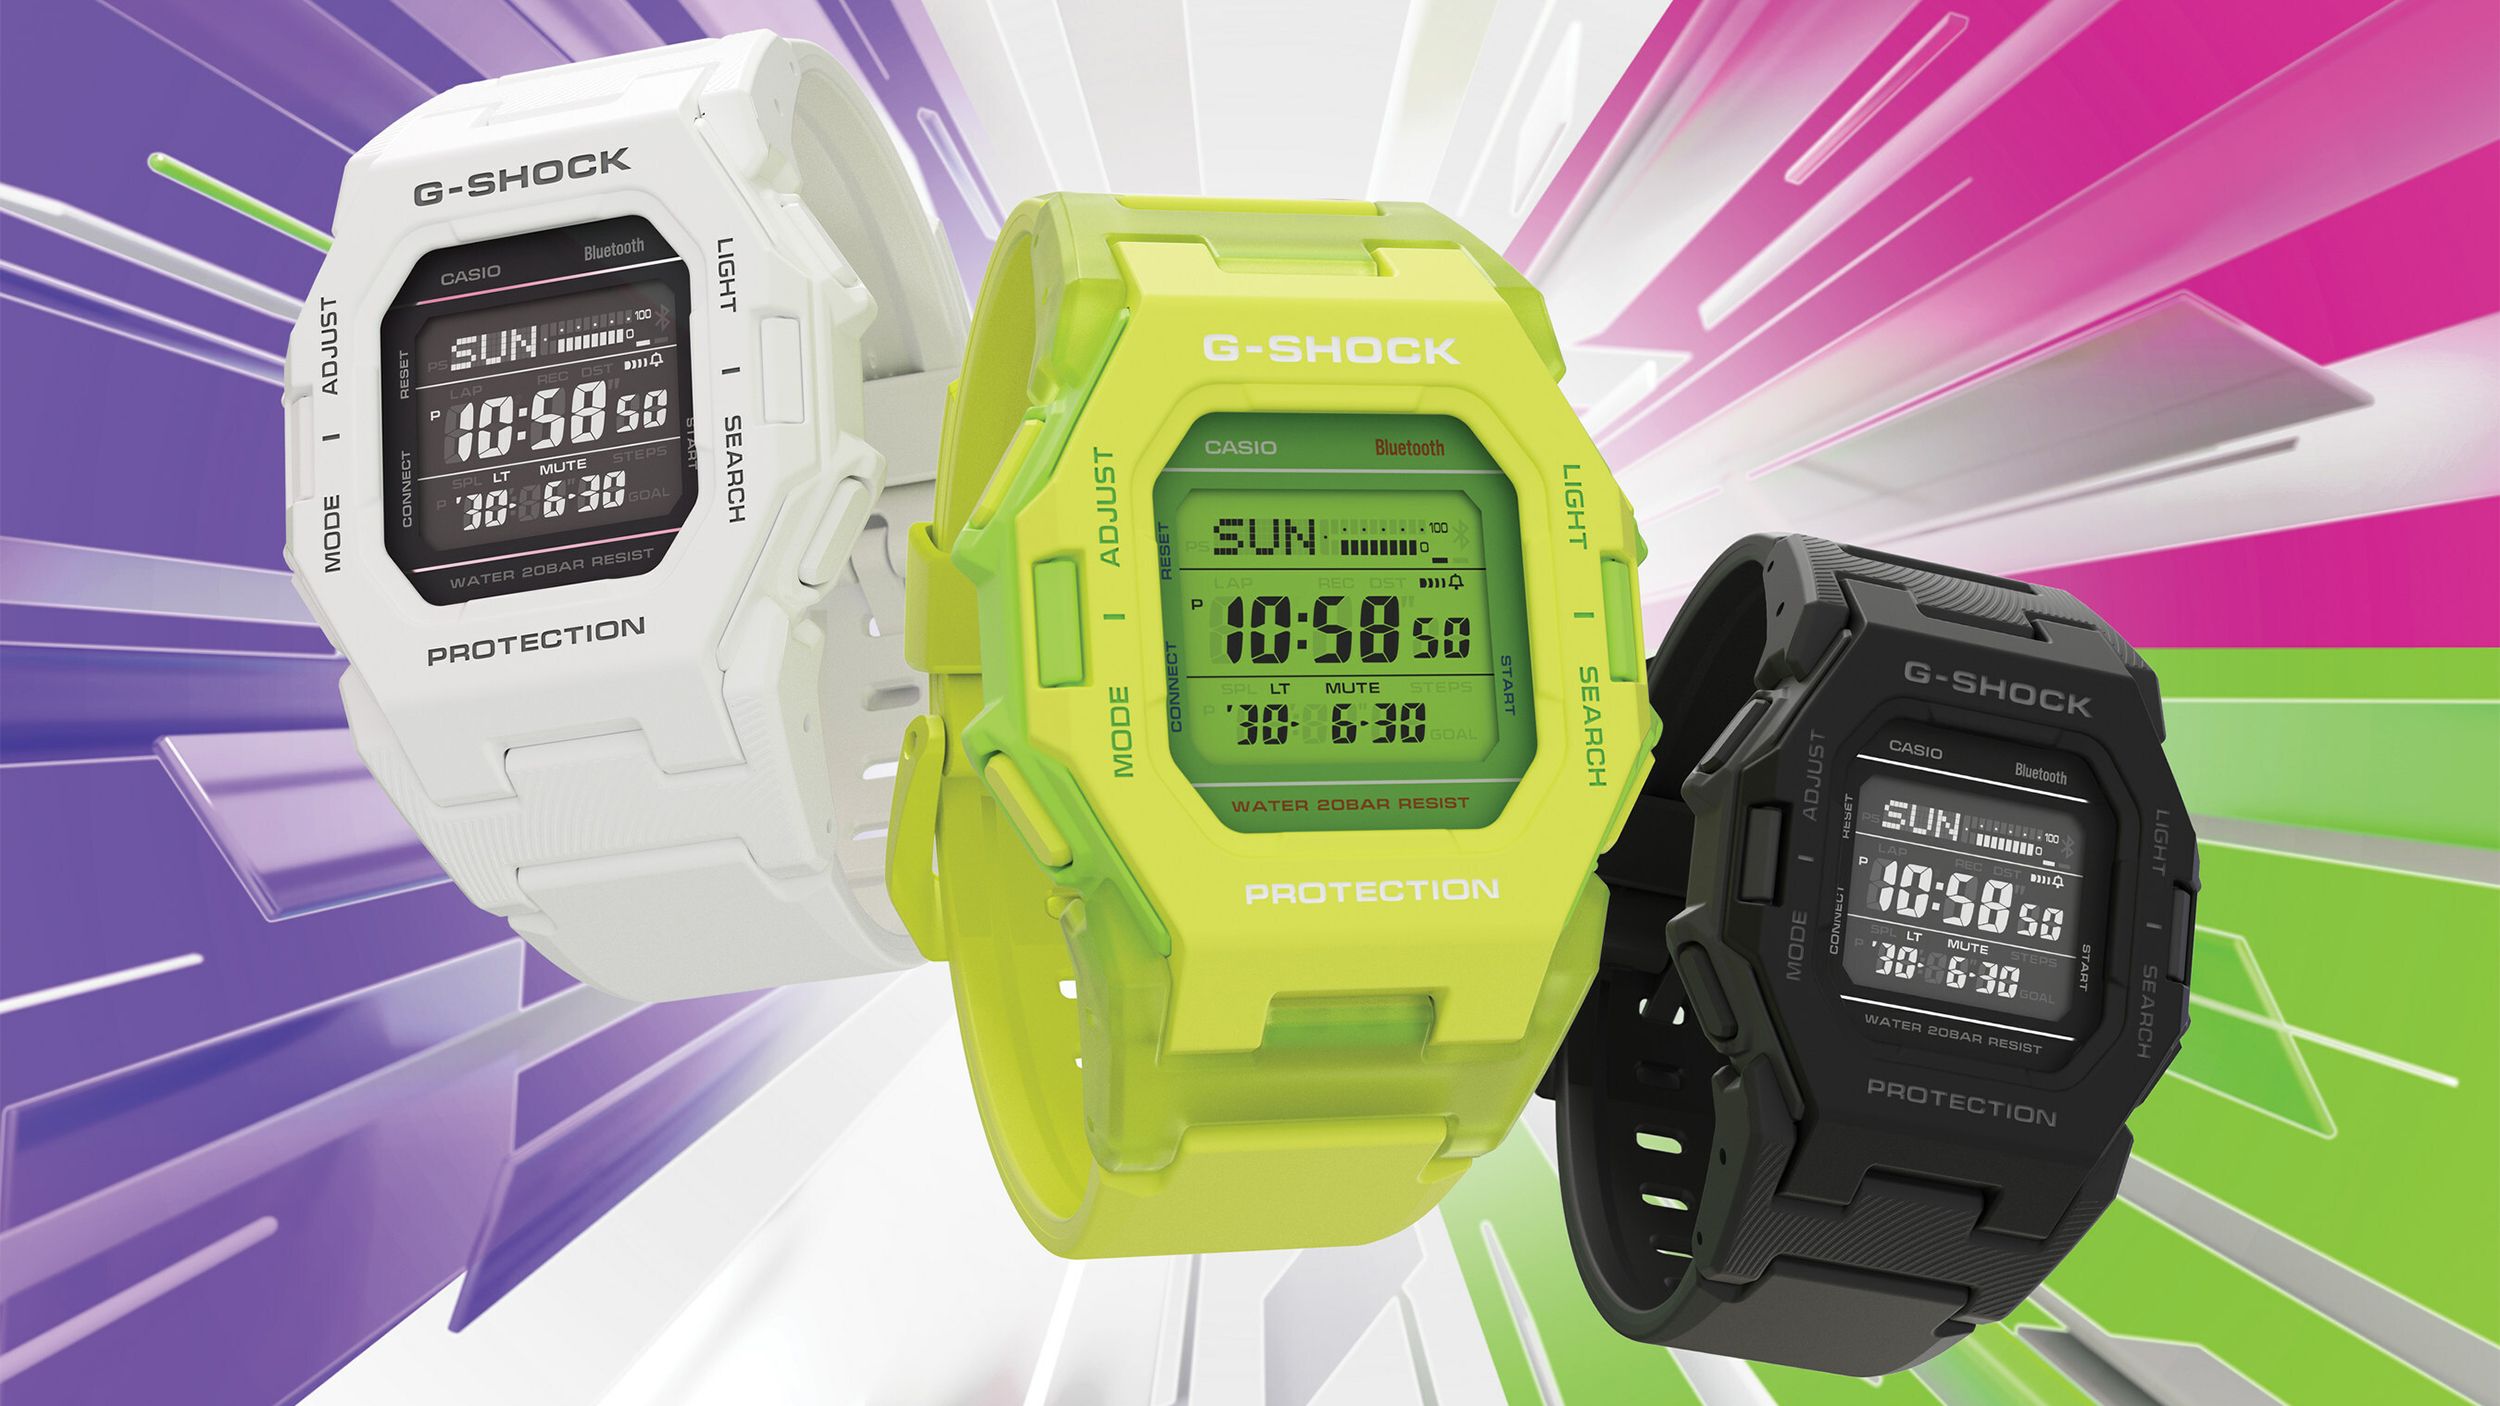 Casio’s newest G-Shock watch is a colorful step counter